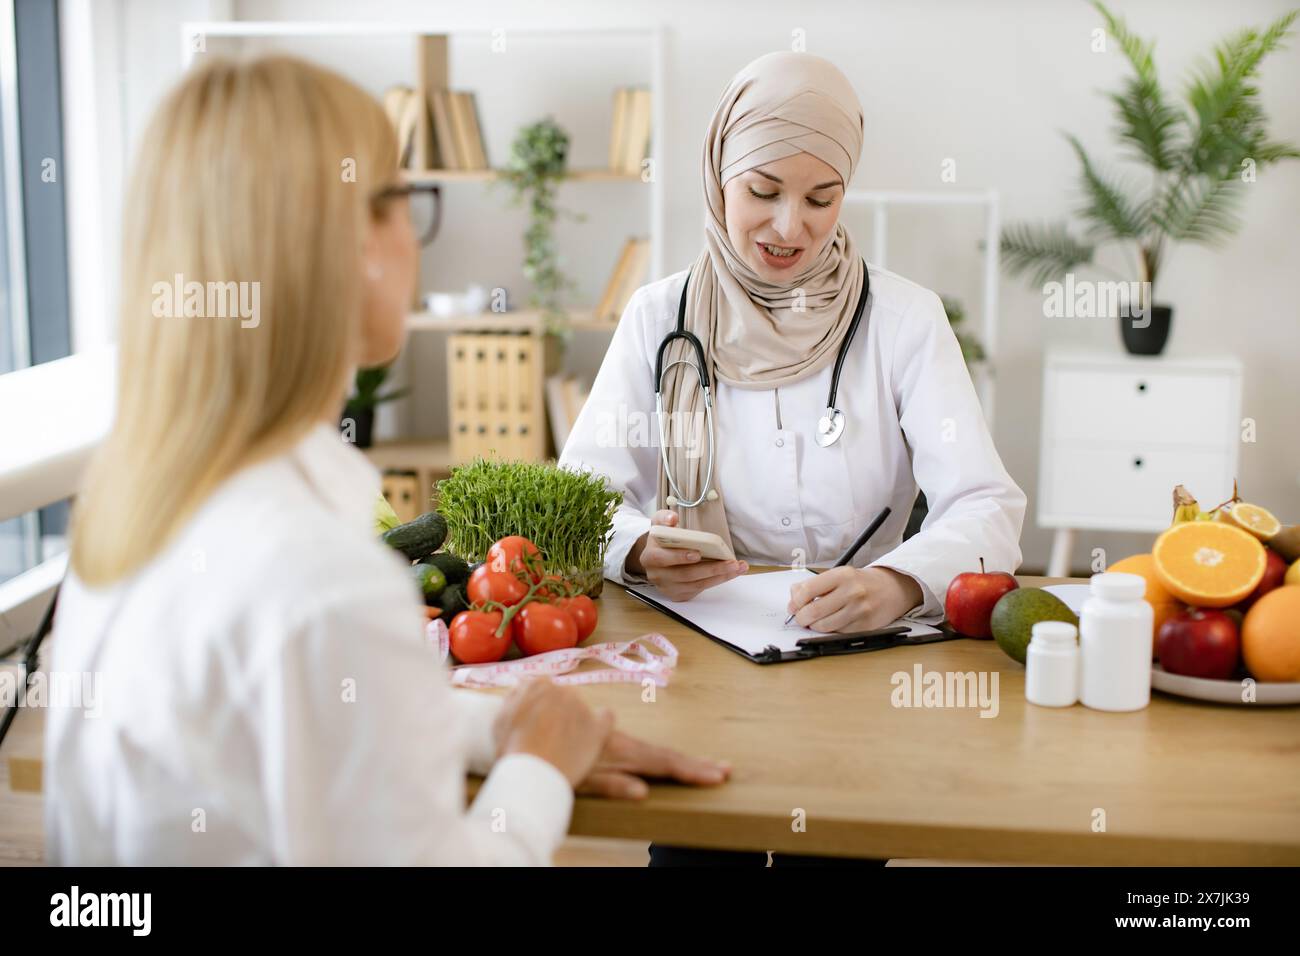 Experienced female dietitian preparer course of healthy nutrition for adult woman. Muslim female doctor sitting at table writing diet plan talking wit Stock Photo